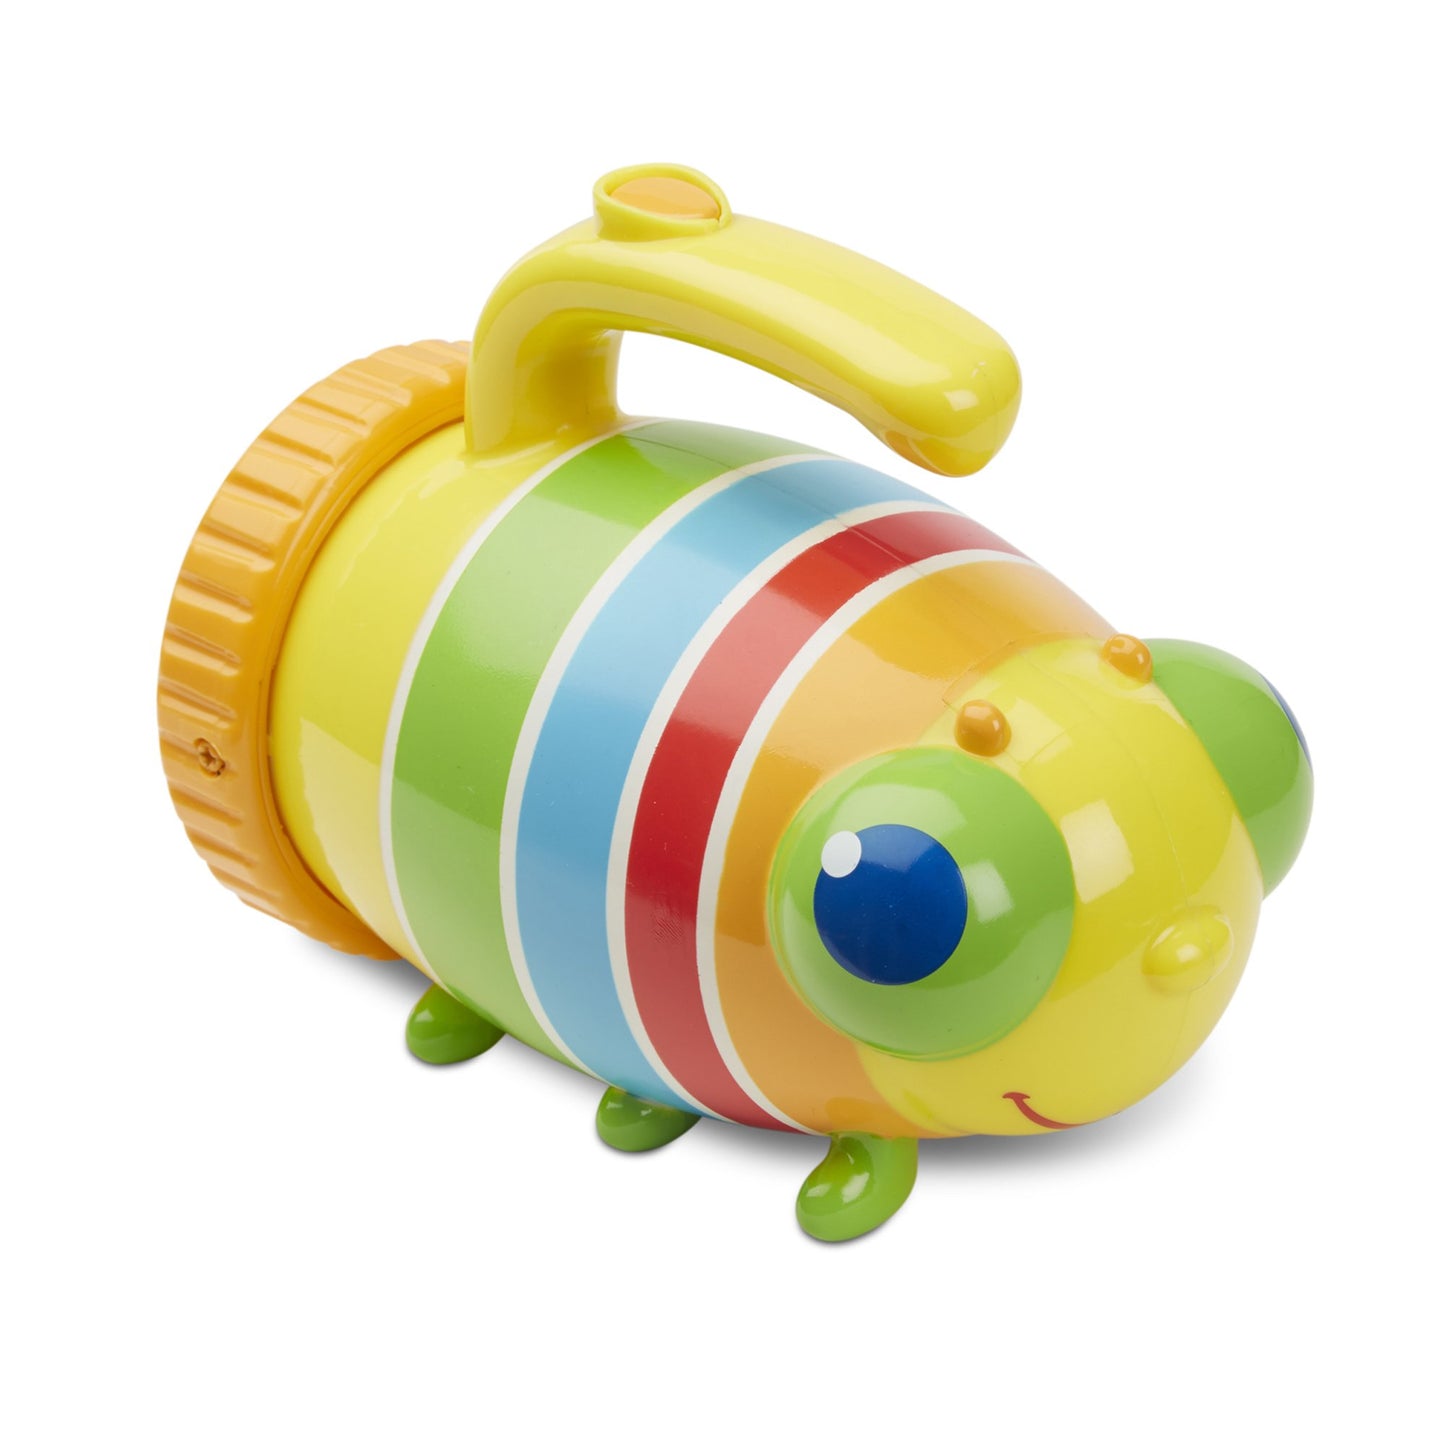 Melissa & Doug lommelygte Bug - All About Kids Odense